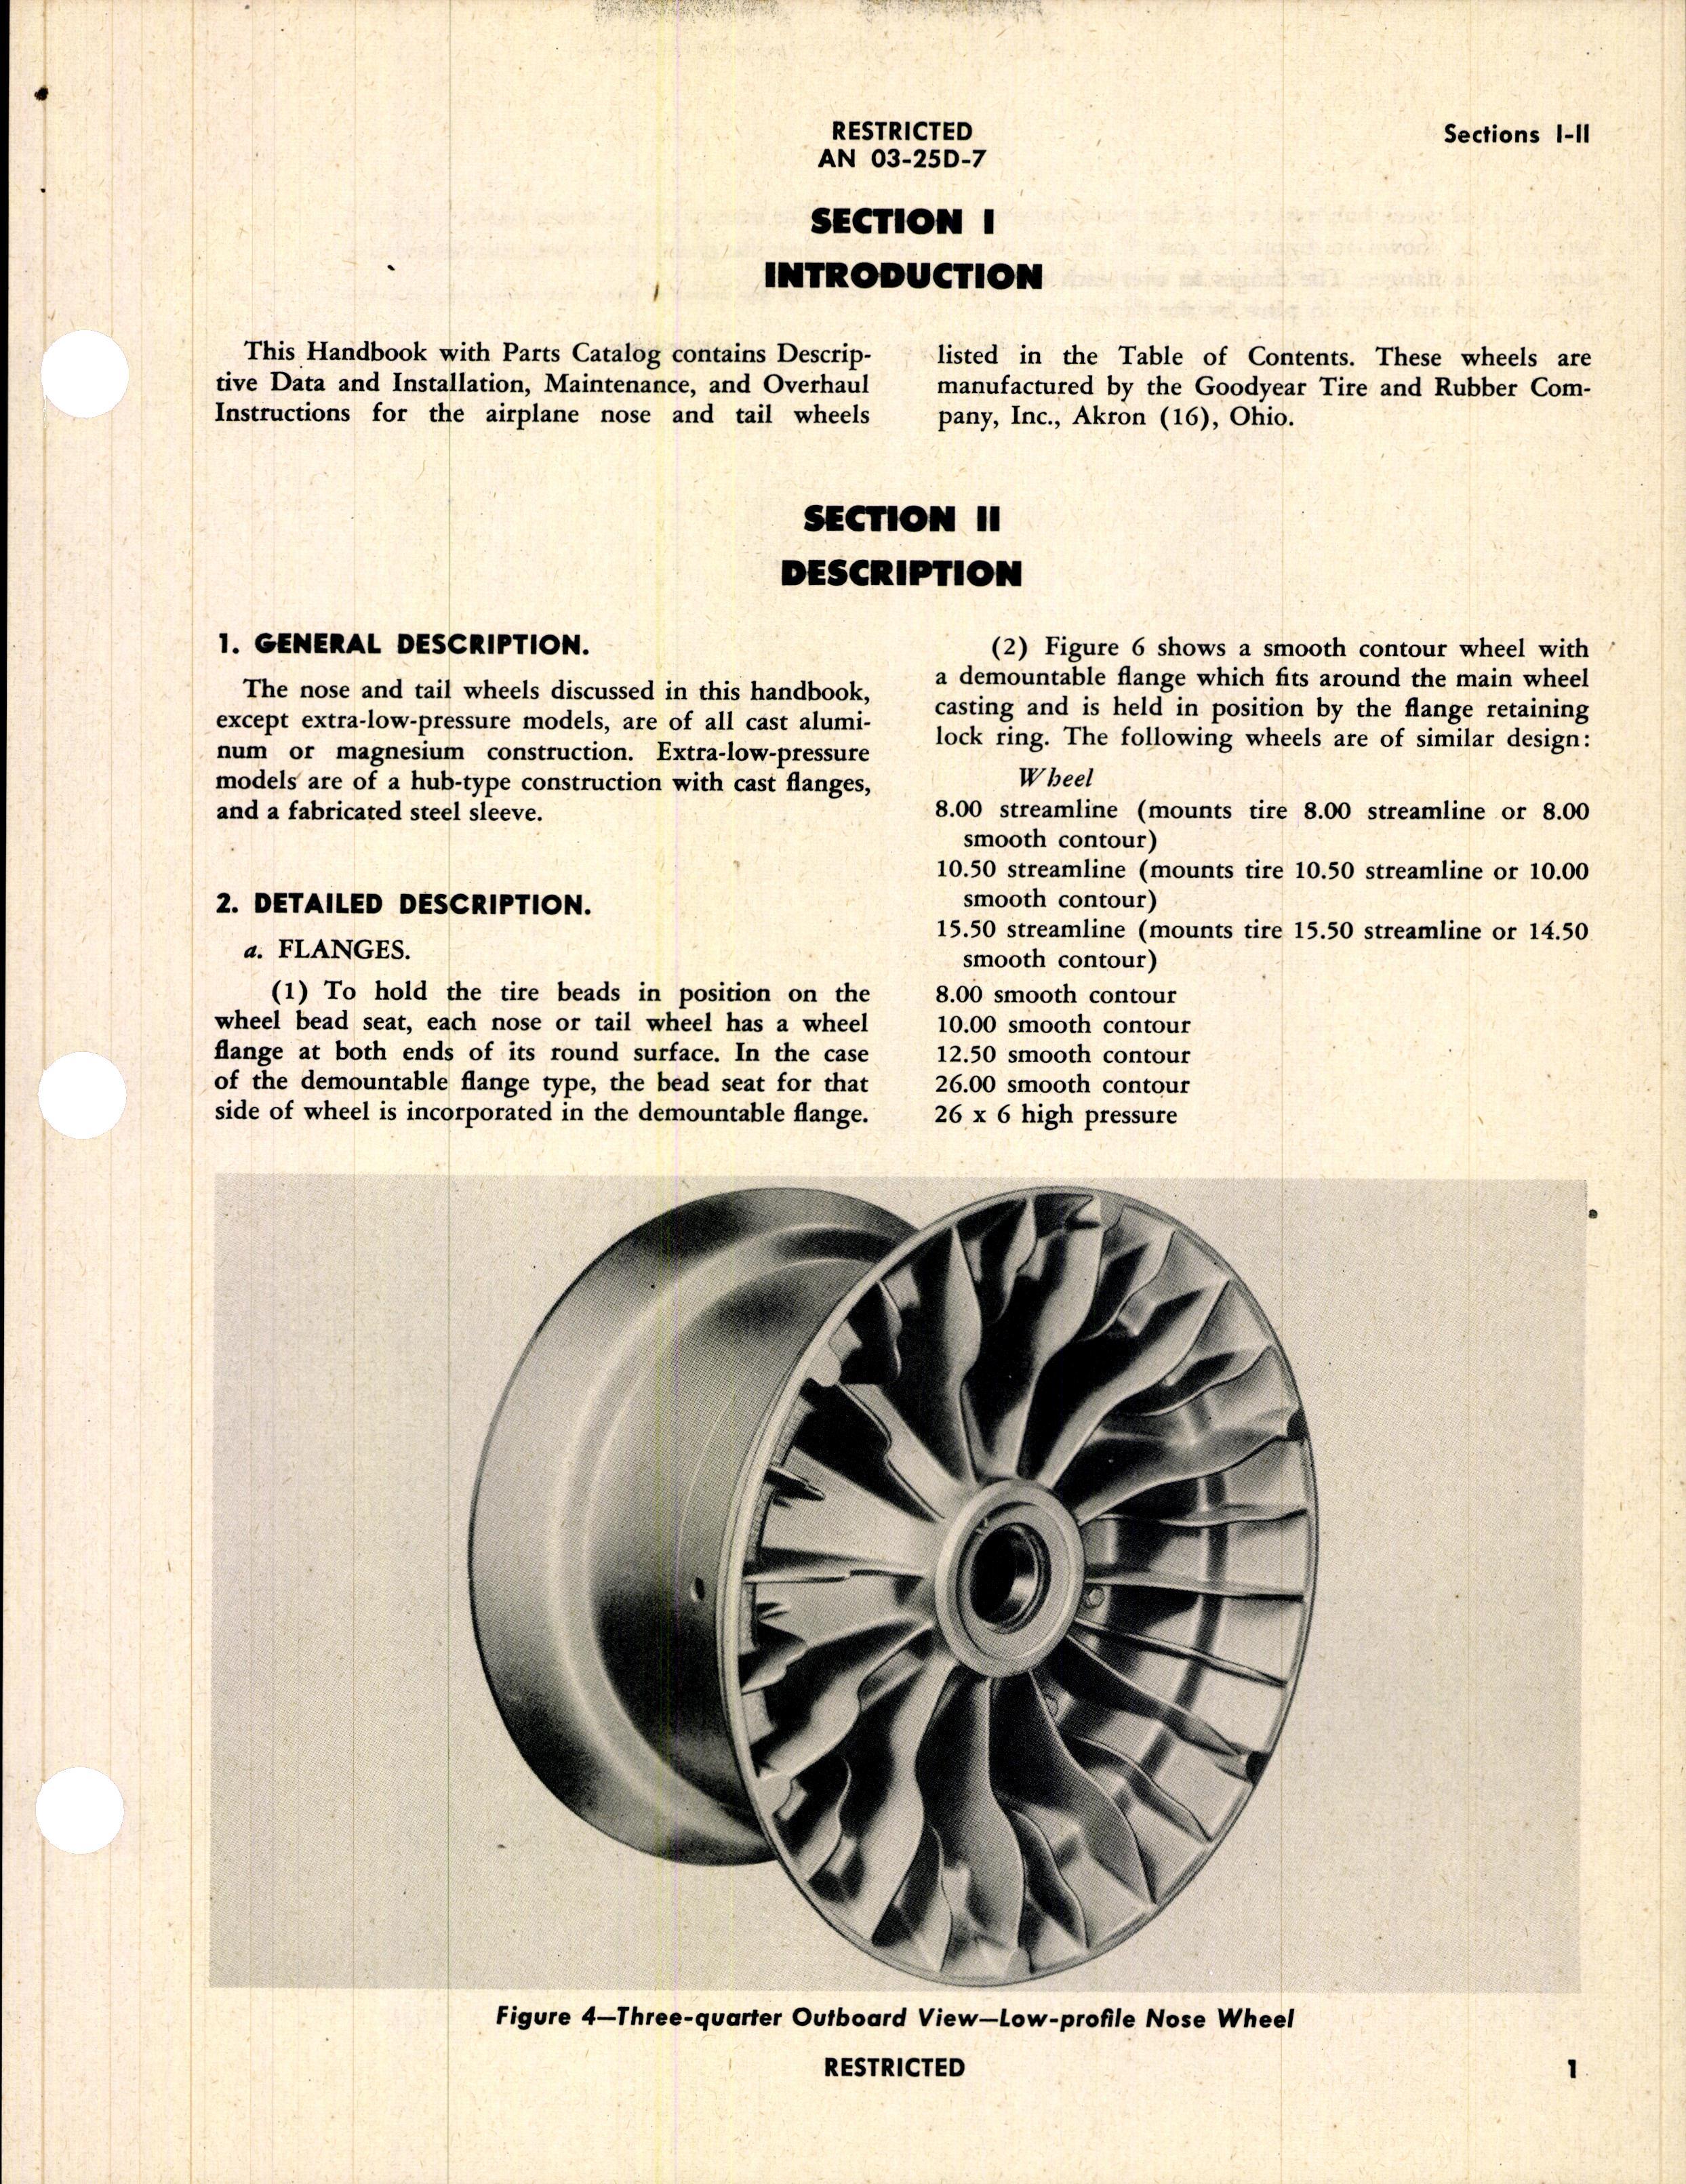 Sample page 7 from AirCorps Library document: Operation, Service and Overhaul Instructions with Parts Catalog for Nose and Tail Wheels